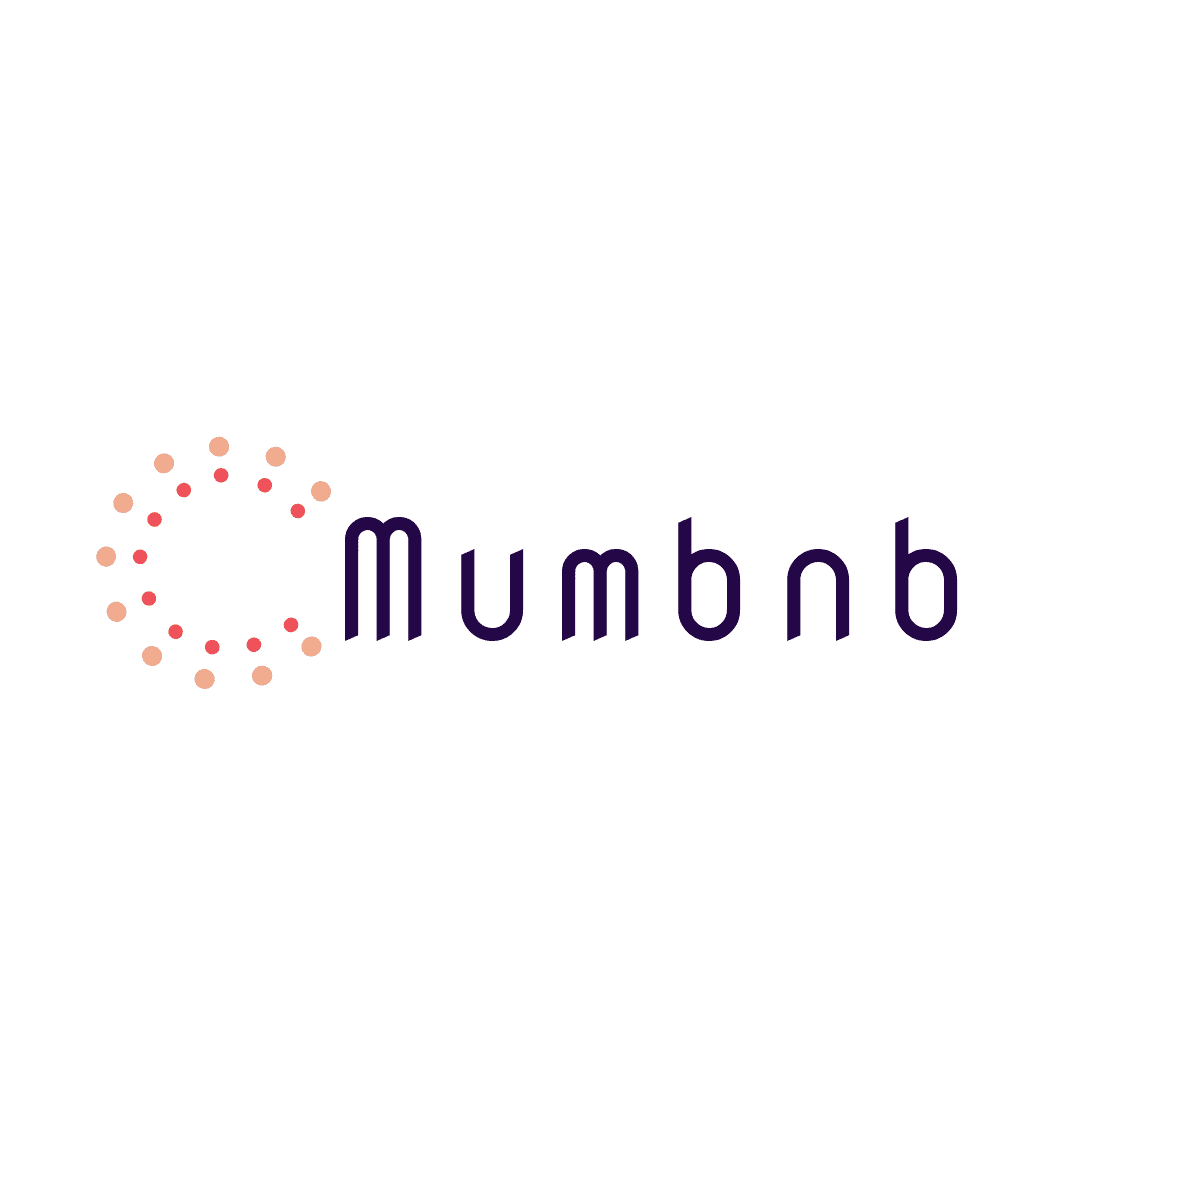 Mumbnb Serving More Traveling Single Mothers As They Go From Beta To Full Launch